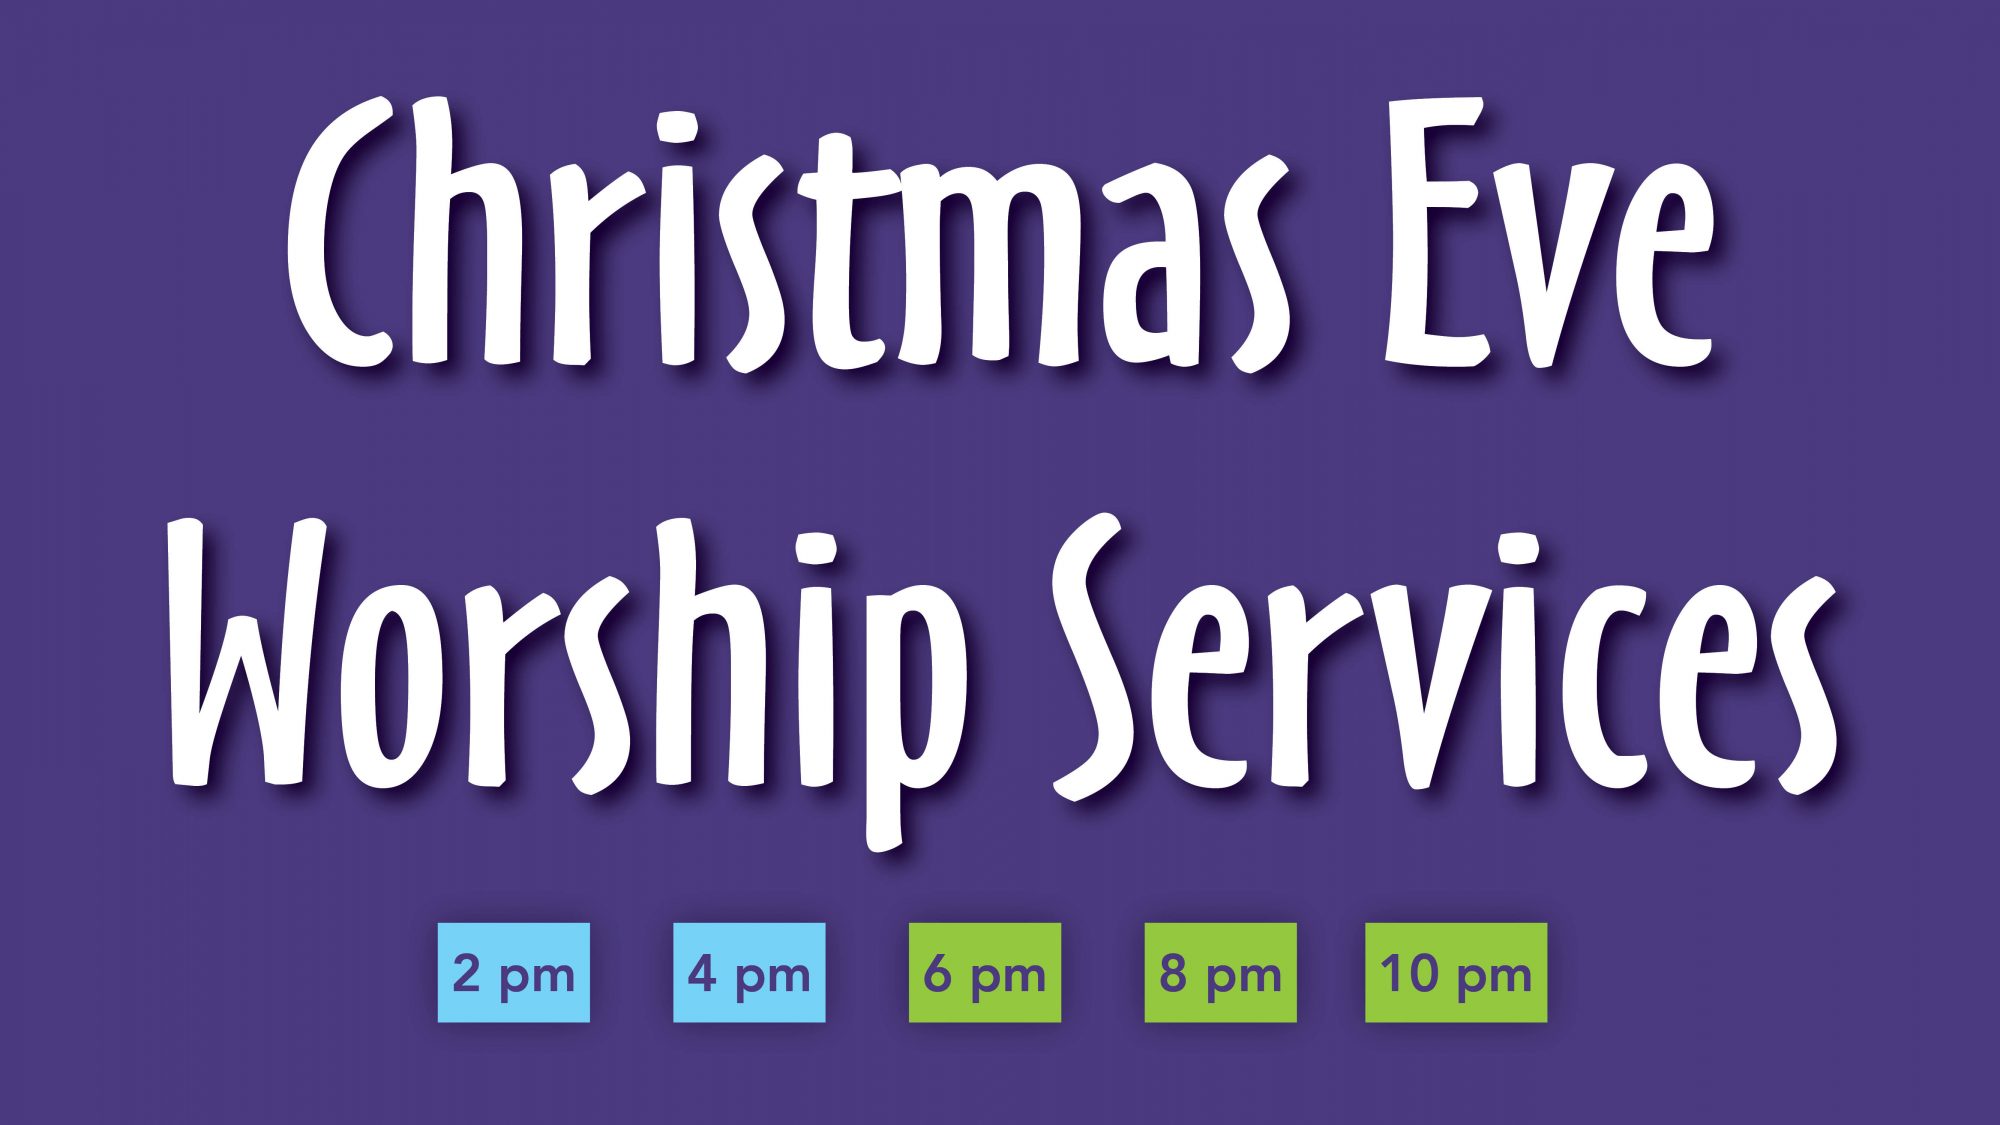 Christmas Eve Worship Services at Parker UMC. We have a 2, 4, 6, 8 and 10 p.m. service. Click the image for more details.